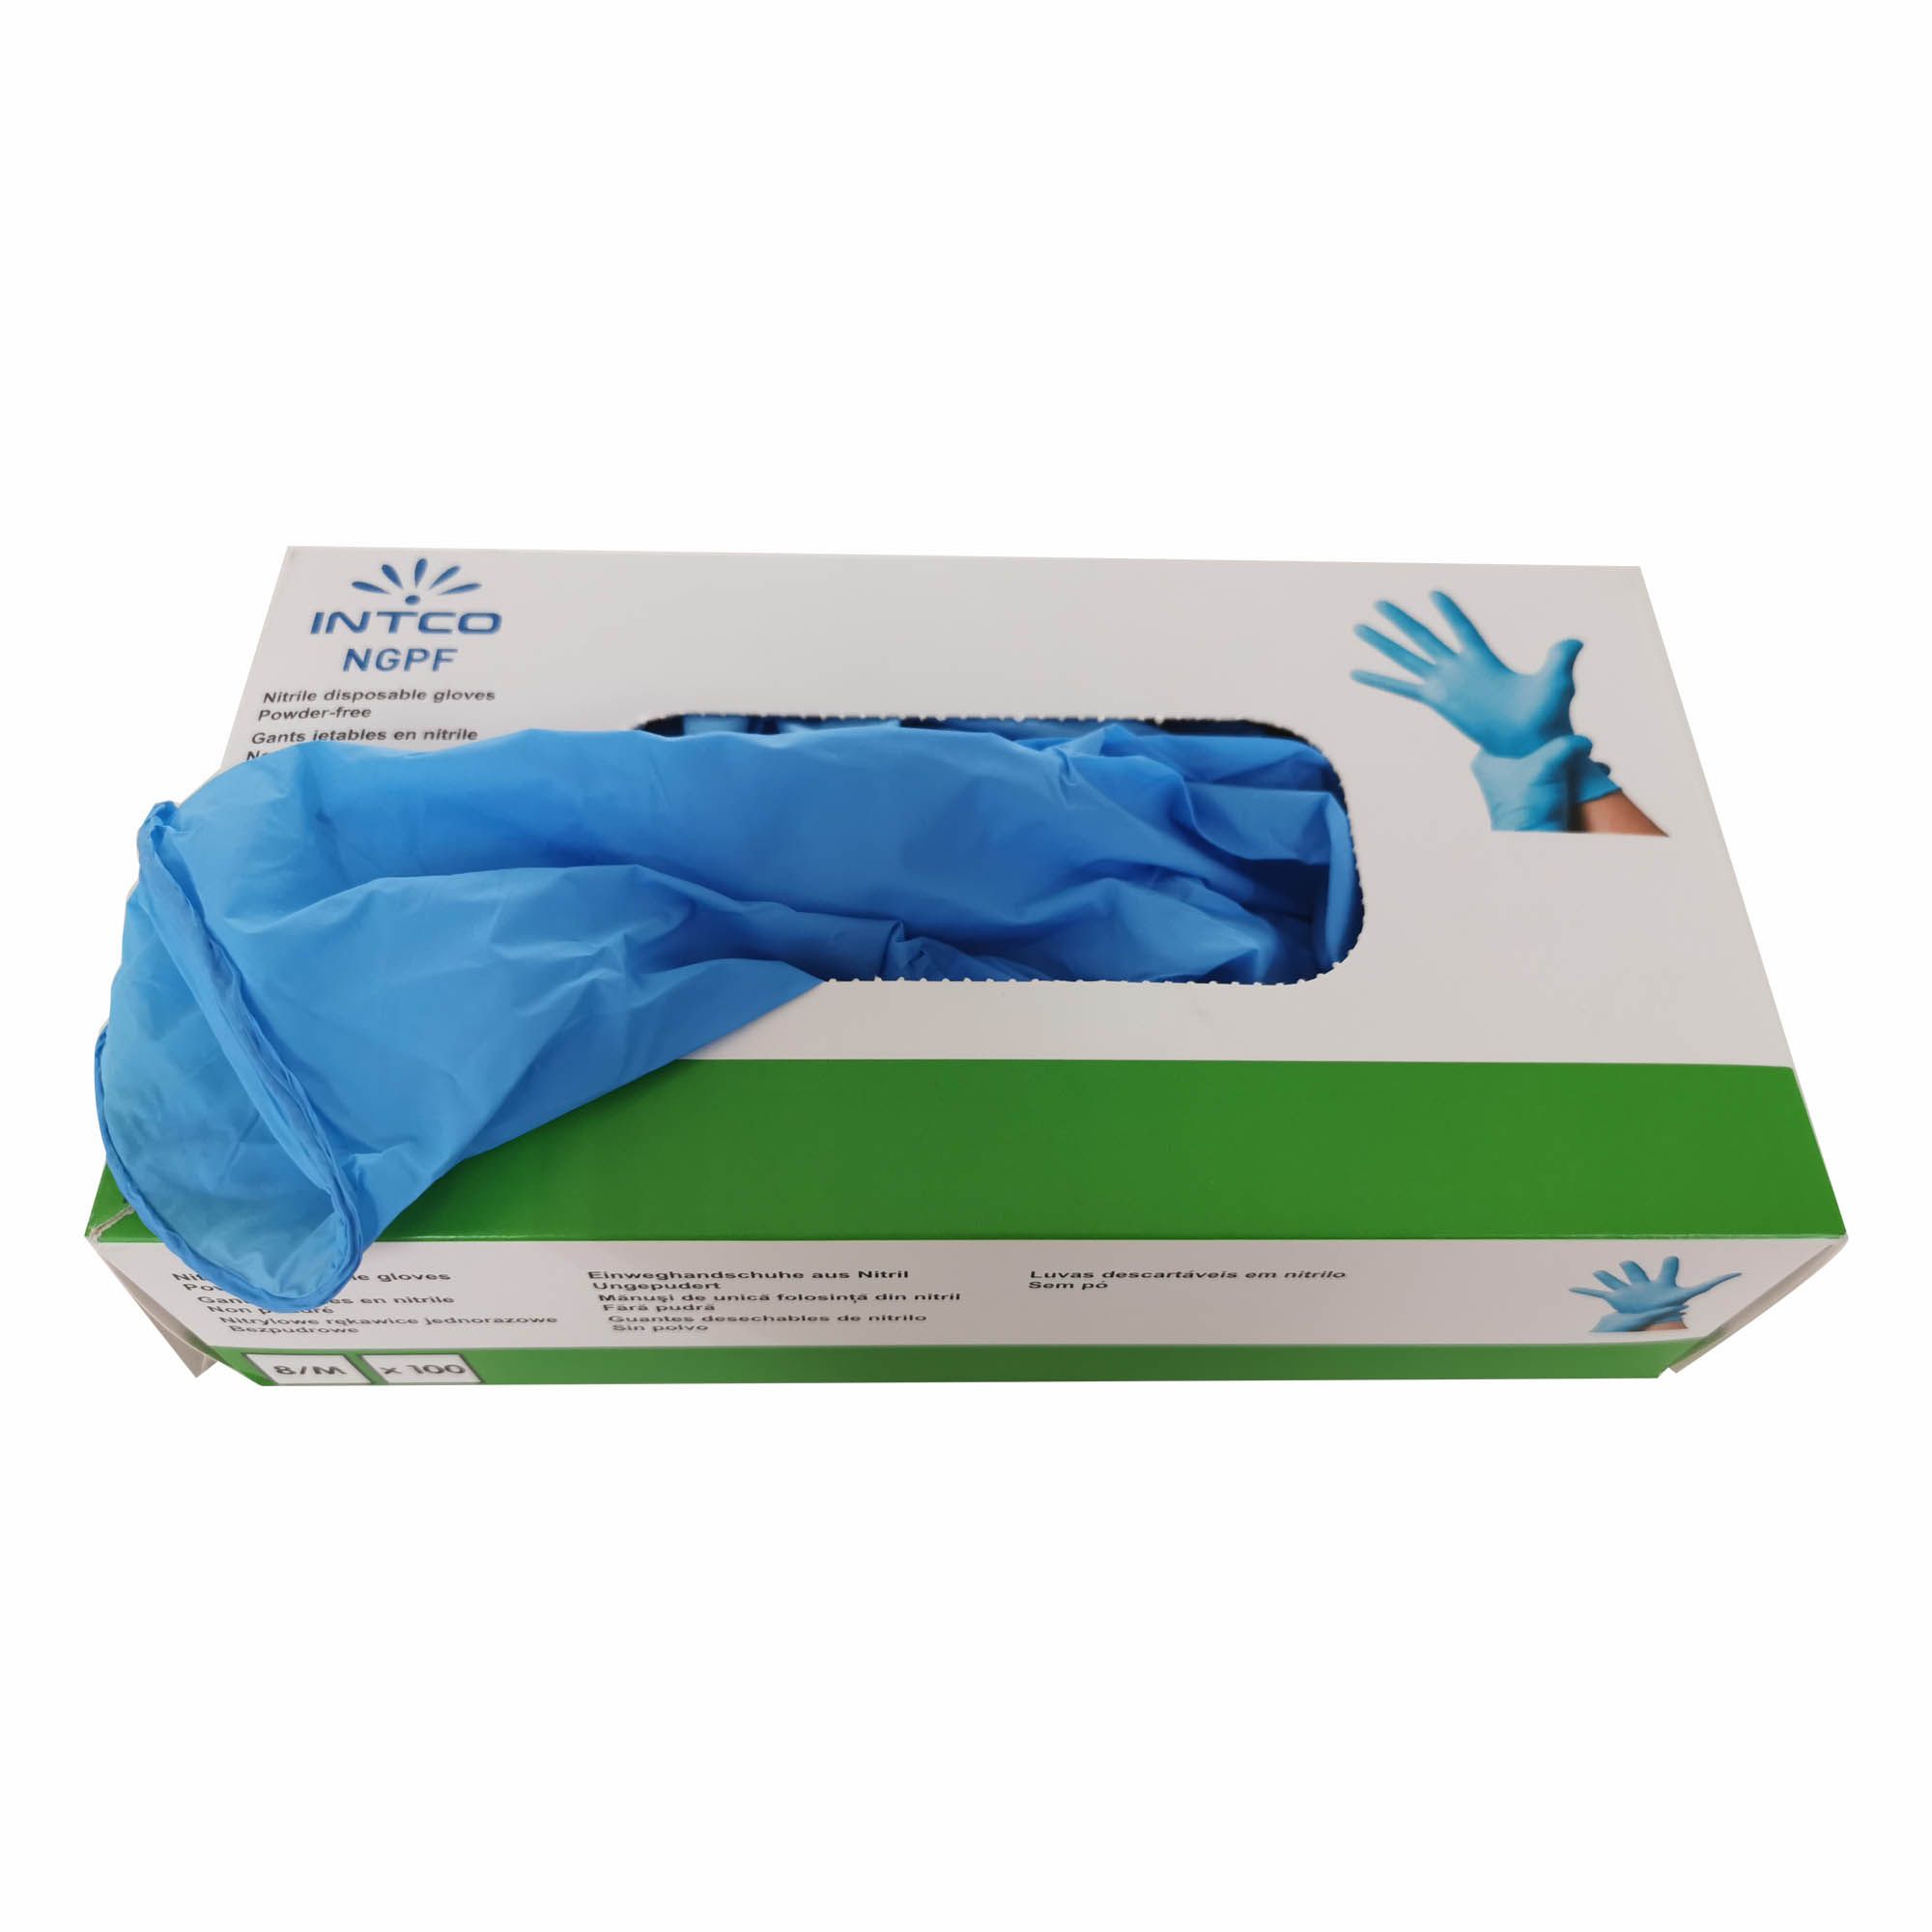 Intco Nitrile Disposable gloves Medium, Pack of 100